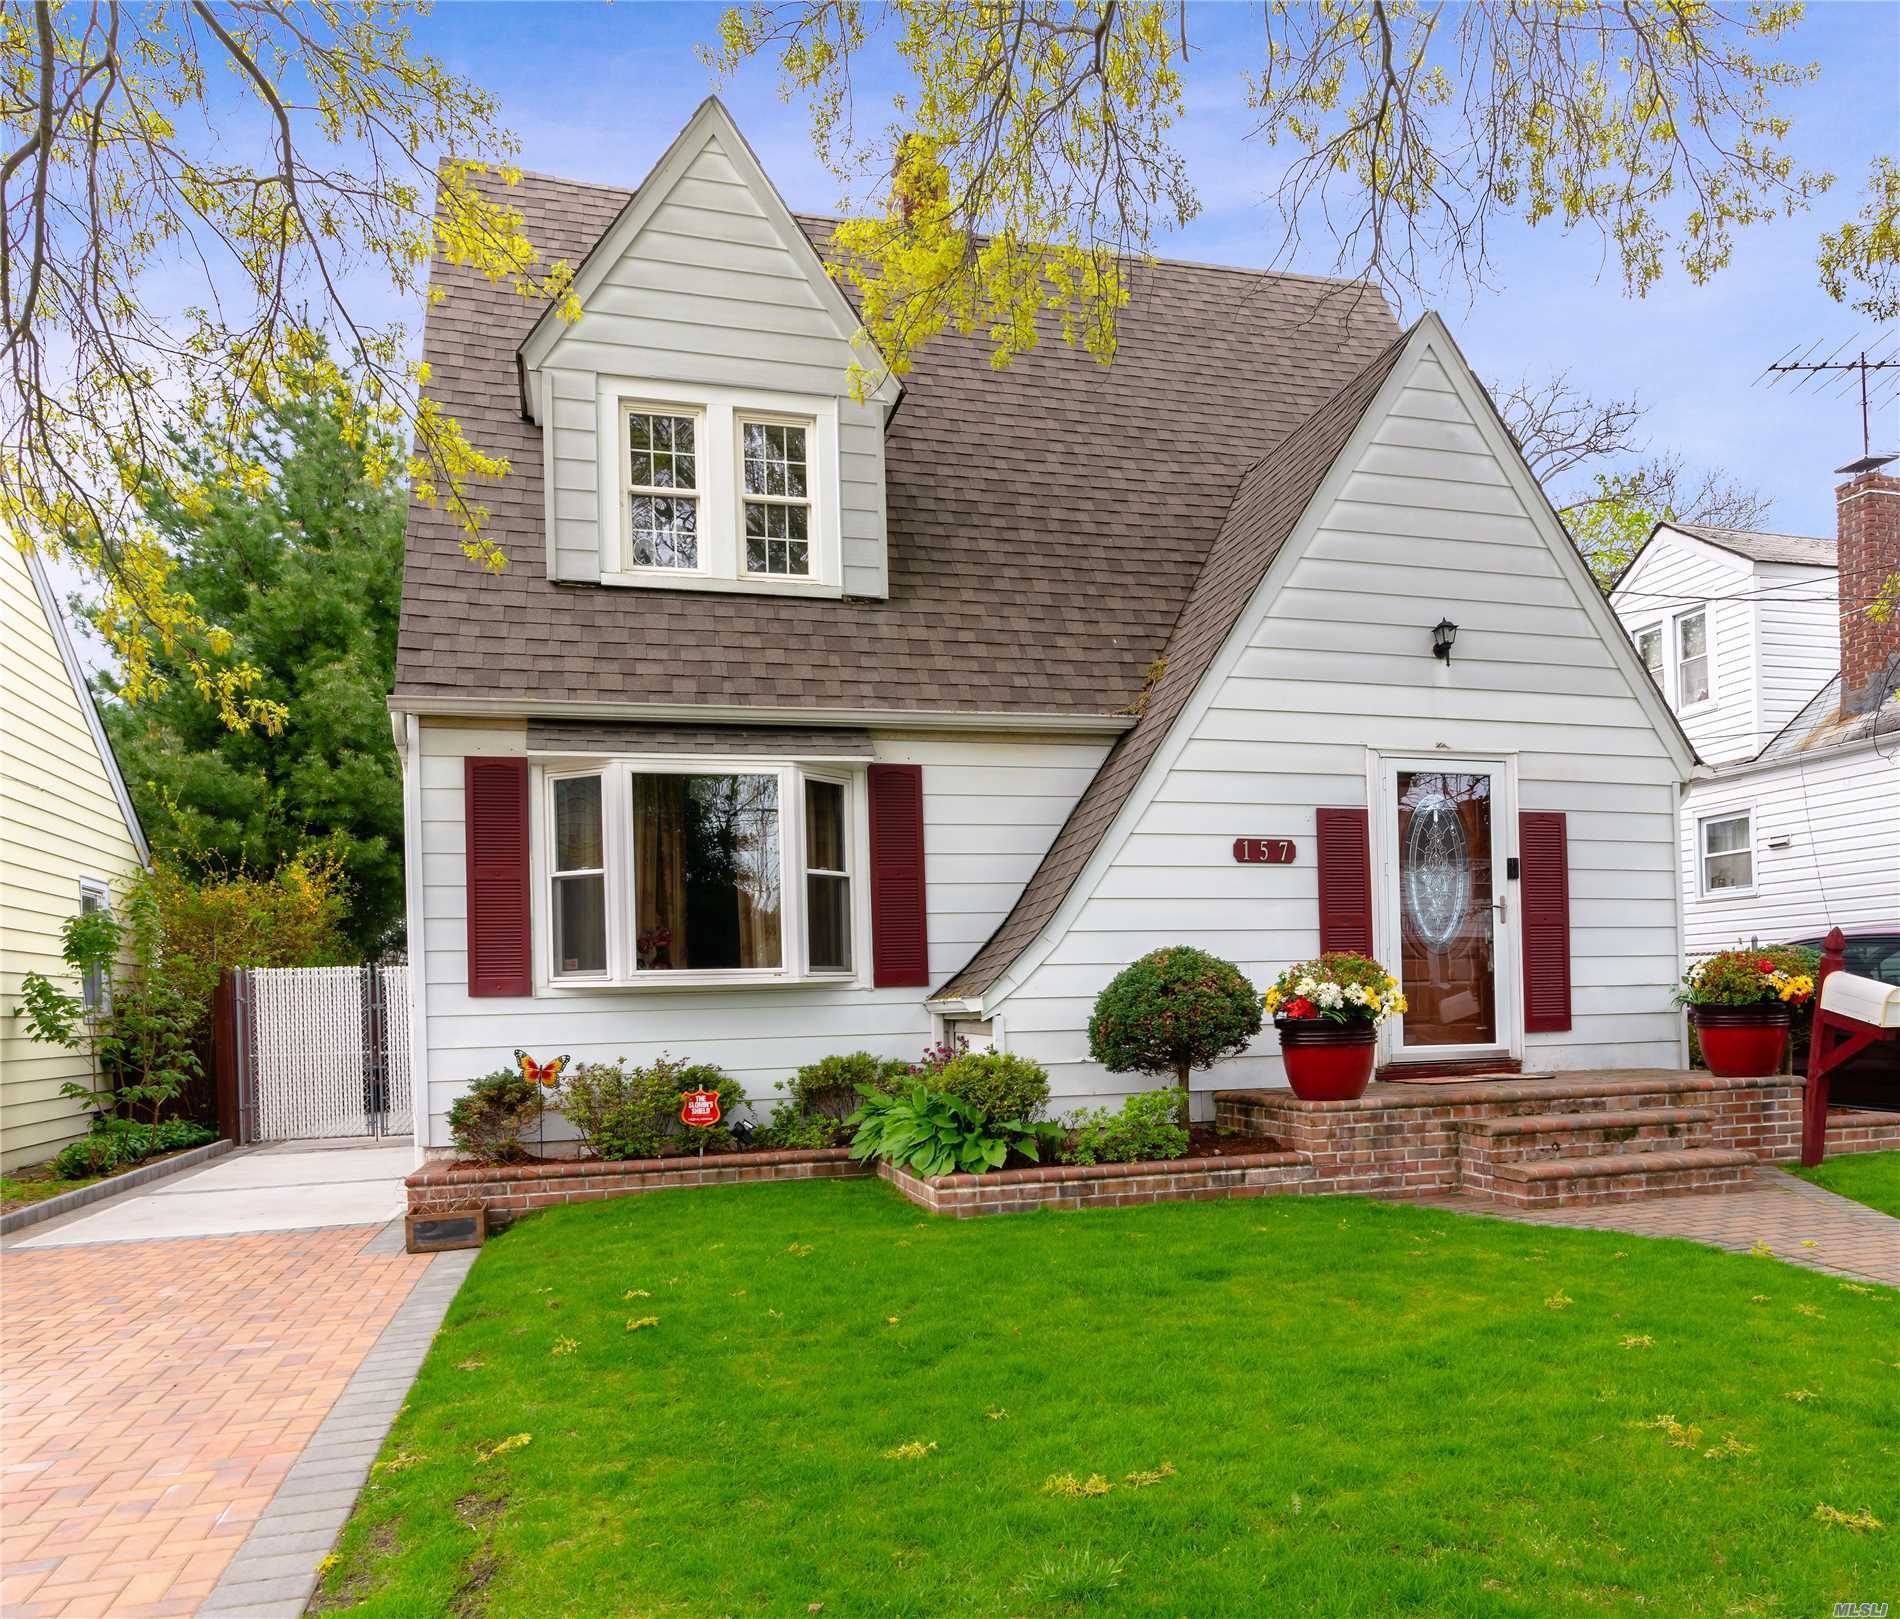 This Beautiful Tudor/Colonial nestled near to the Ingraham Estates area is in the Uniondale School District, and has many other desirable features. The LR has a wood burning FPL, & flows into the FDR which lead to the kitchen, & then out to the fabulous deck & backyard. H/W flooring throughout , 2 zone heating, 220 Amps electric, 7yrs young roof, Gas Heat & a finished basement are just some of the additional amenities that you will find in this perfect starter home or downsizing perfection.